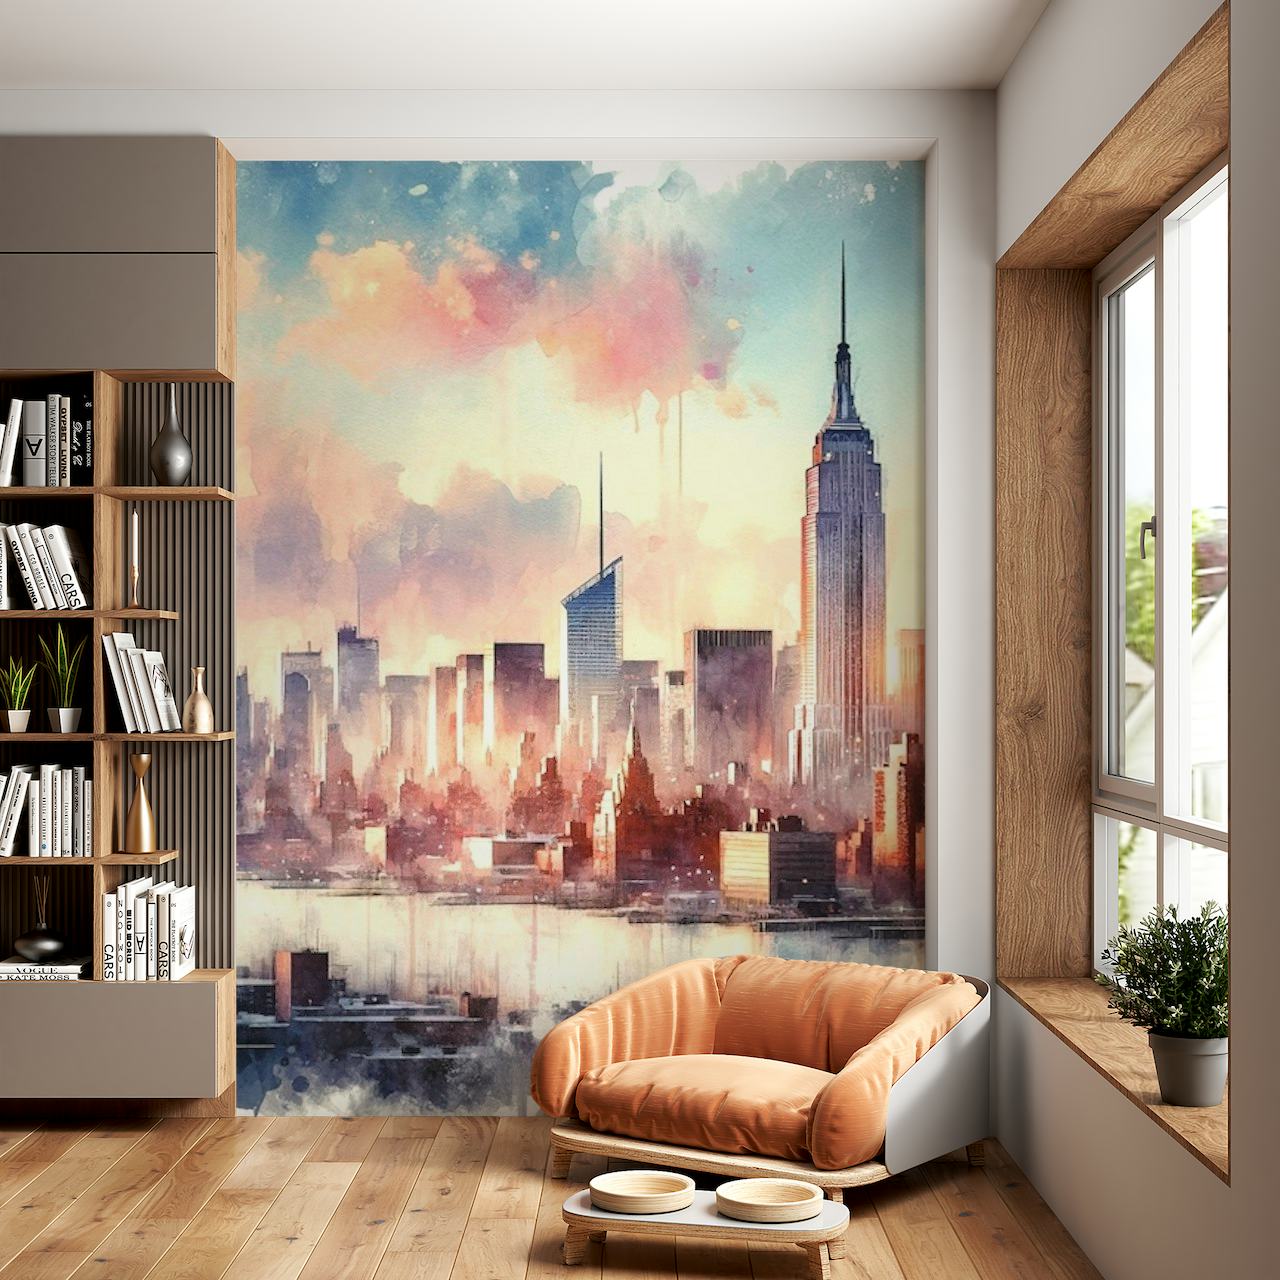 Sunset Hues over NYC wallpaper